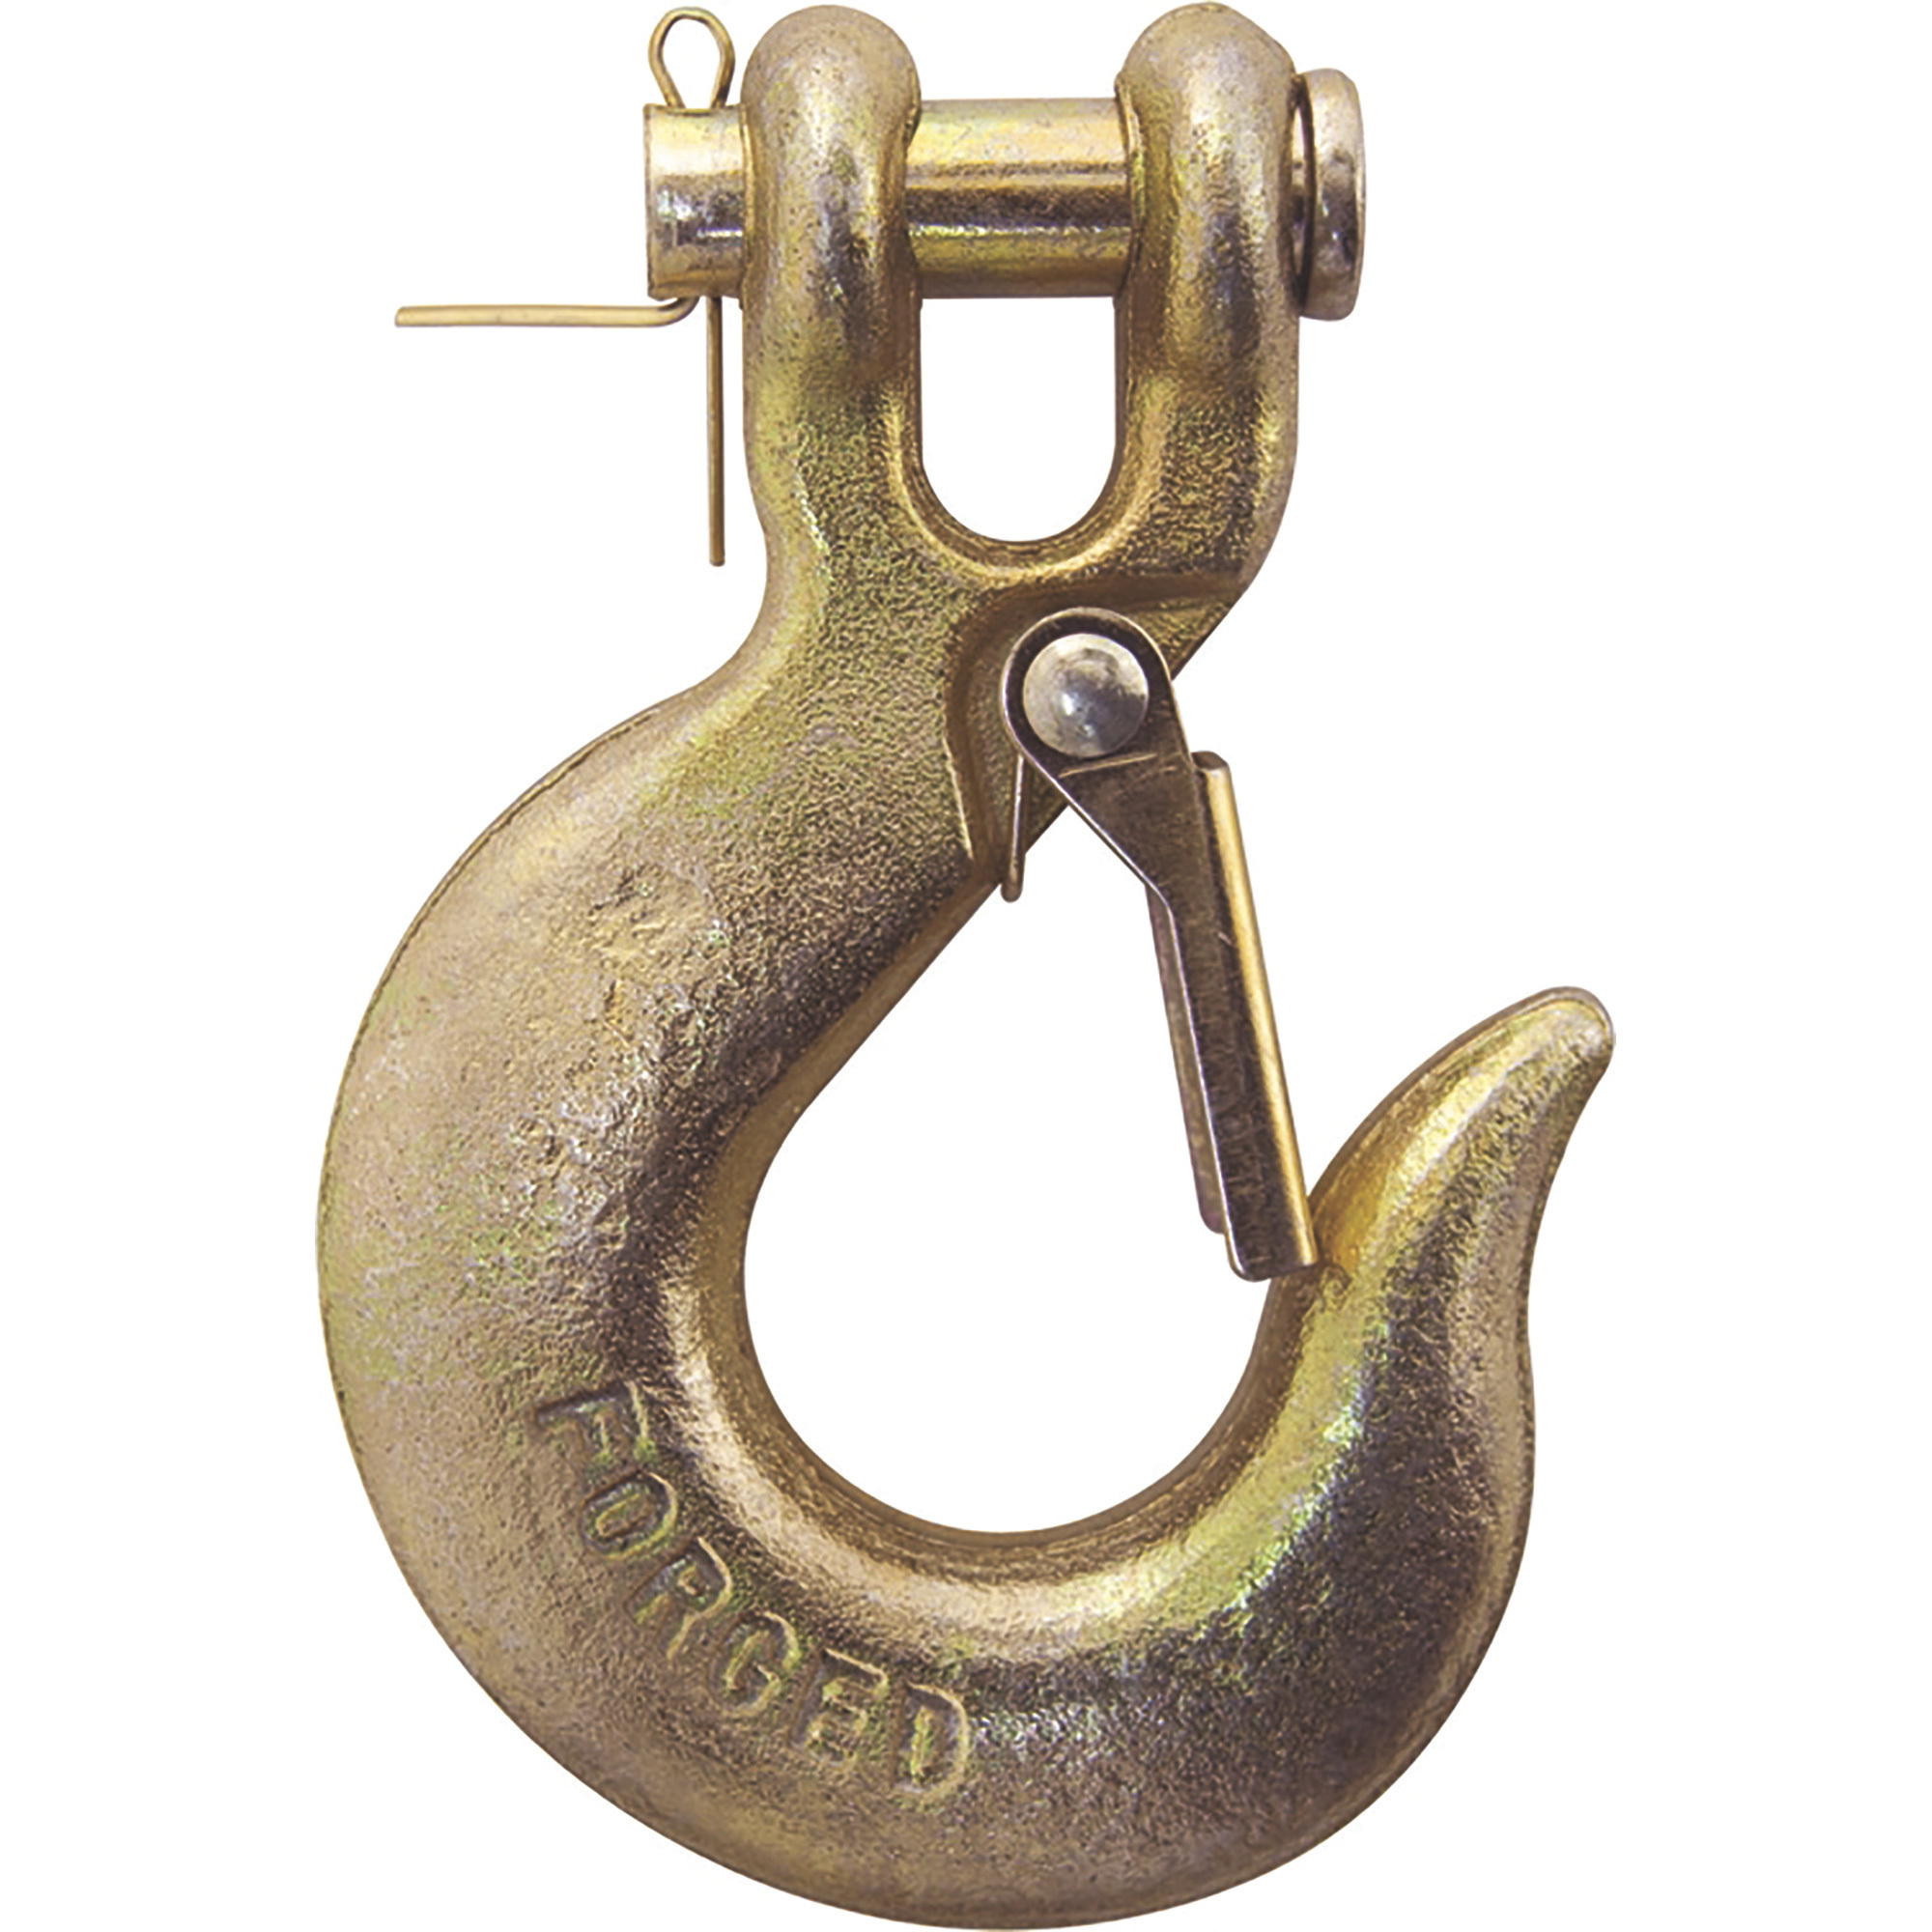 Mibro 5/16Inch GR70 Clevis Slip Hook with Latch, Model 237280